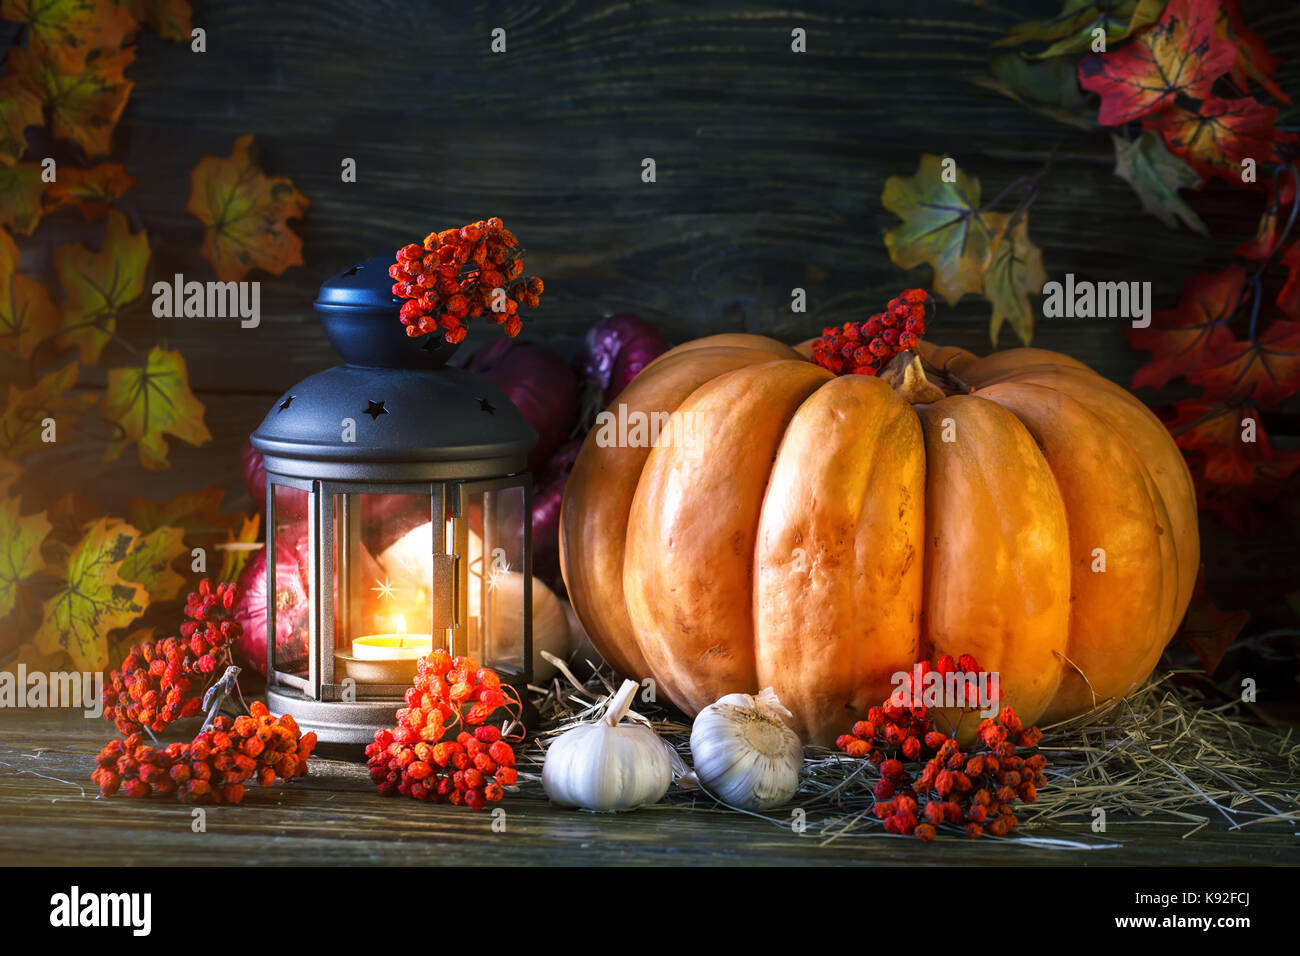 The wooden table decorated with vegetables, pumpkins and autumn leaves. Autumn background. Schastlivy von Thanksgiving Day. Stock Photo